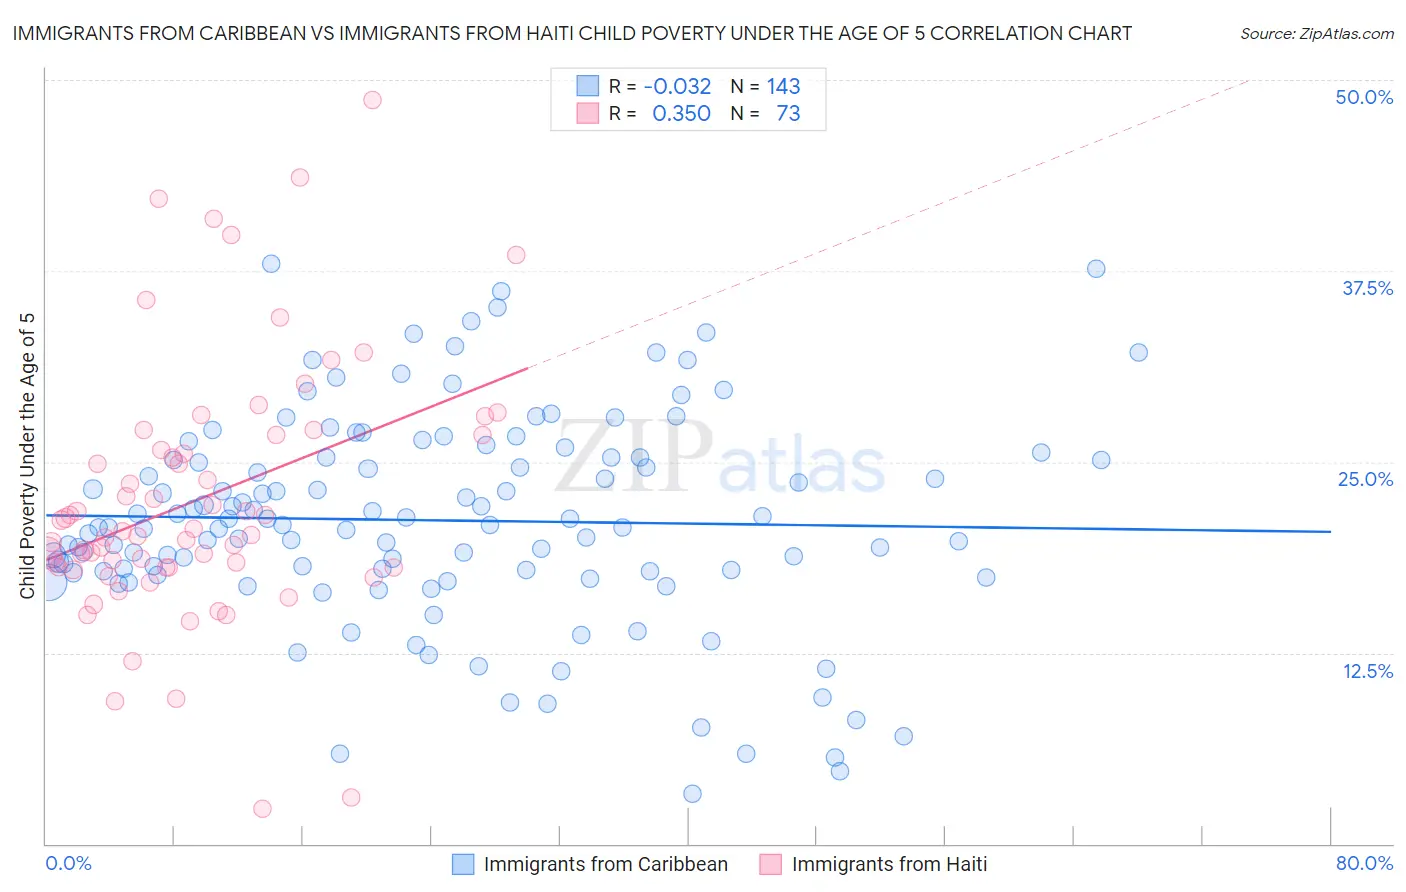 Immigrants from Caribbean vs Immigrants from Haiti Child Poverty Under the Age of 5